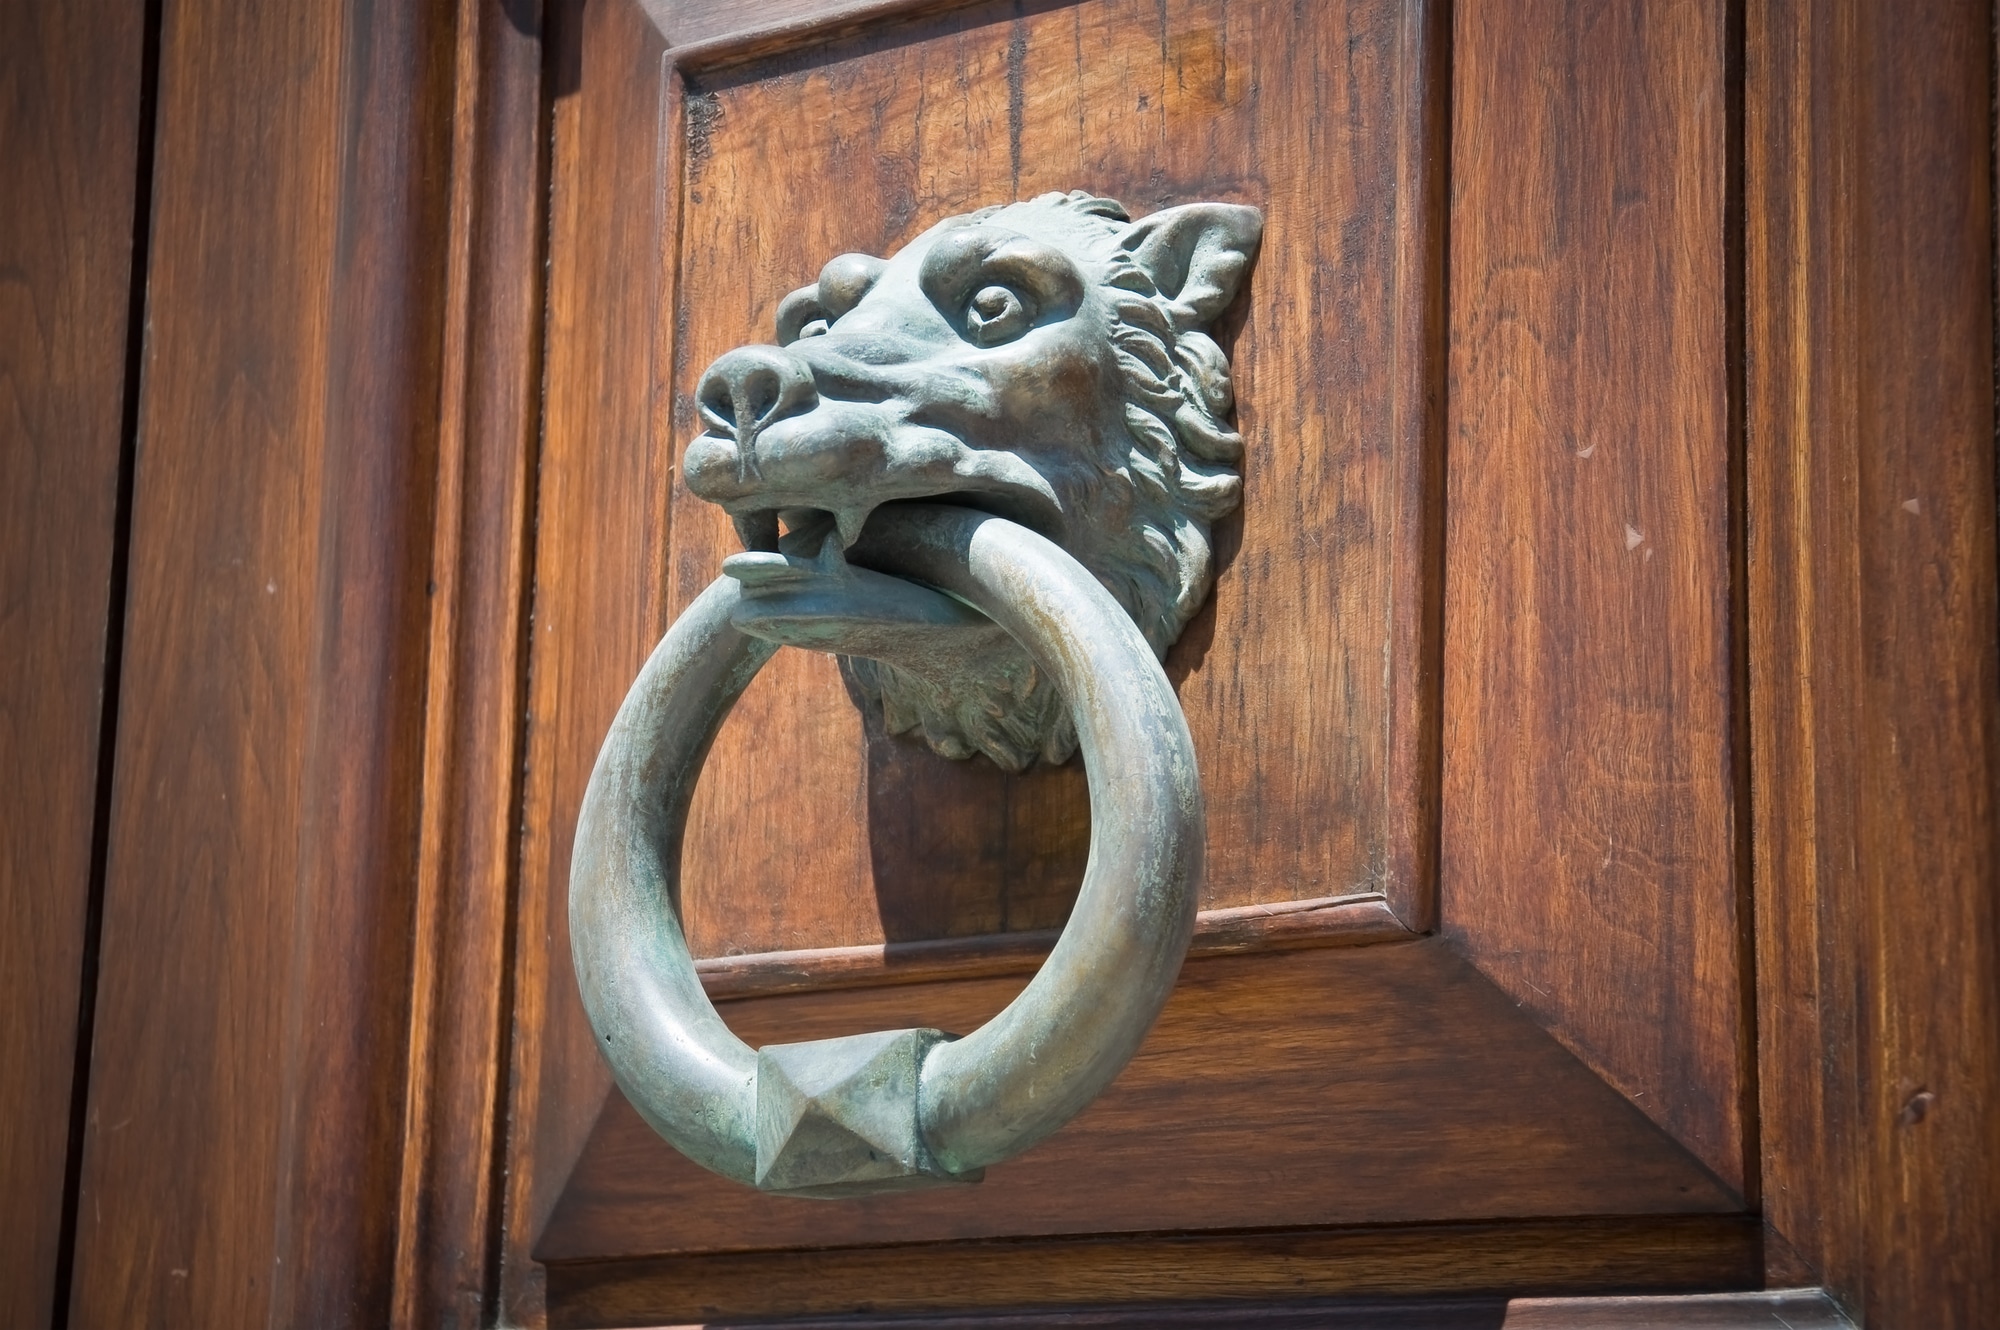 image of an ancient doorknocker in the shape of a dog-like animal with a ring in its mouth